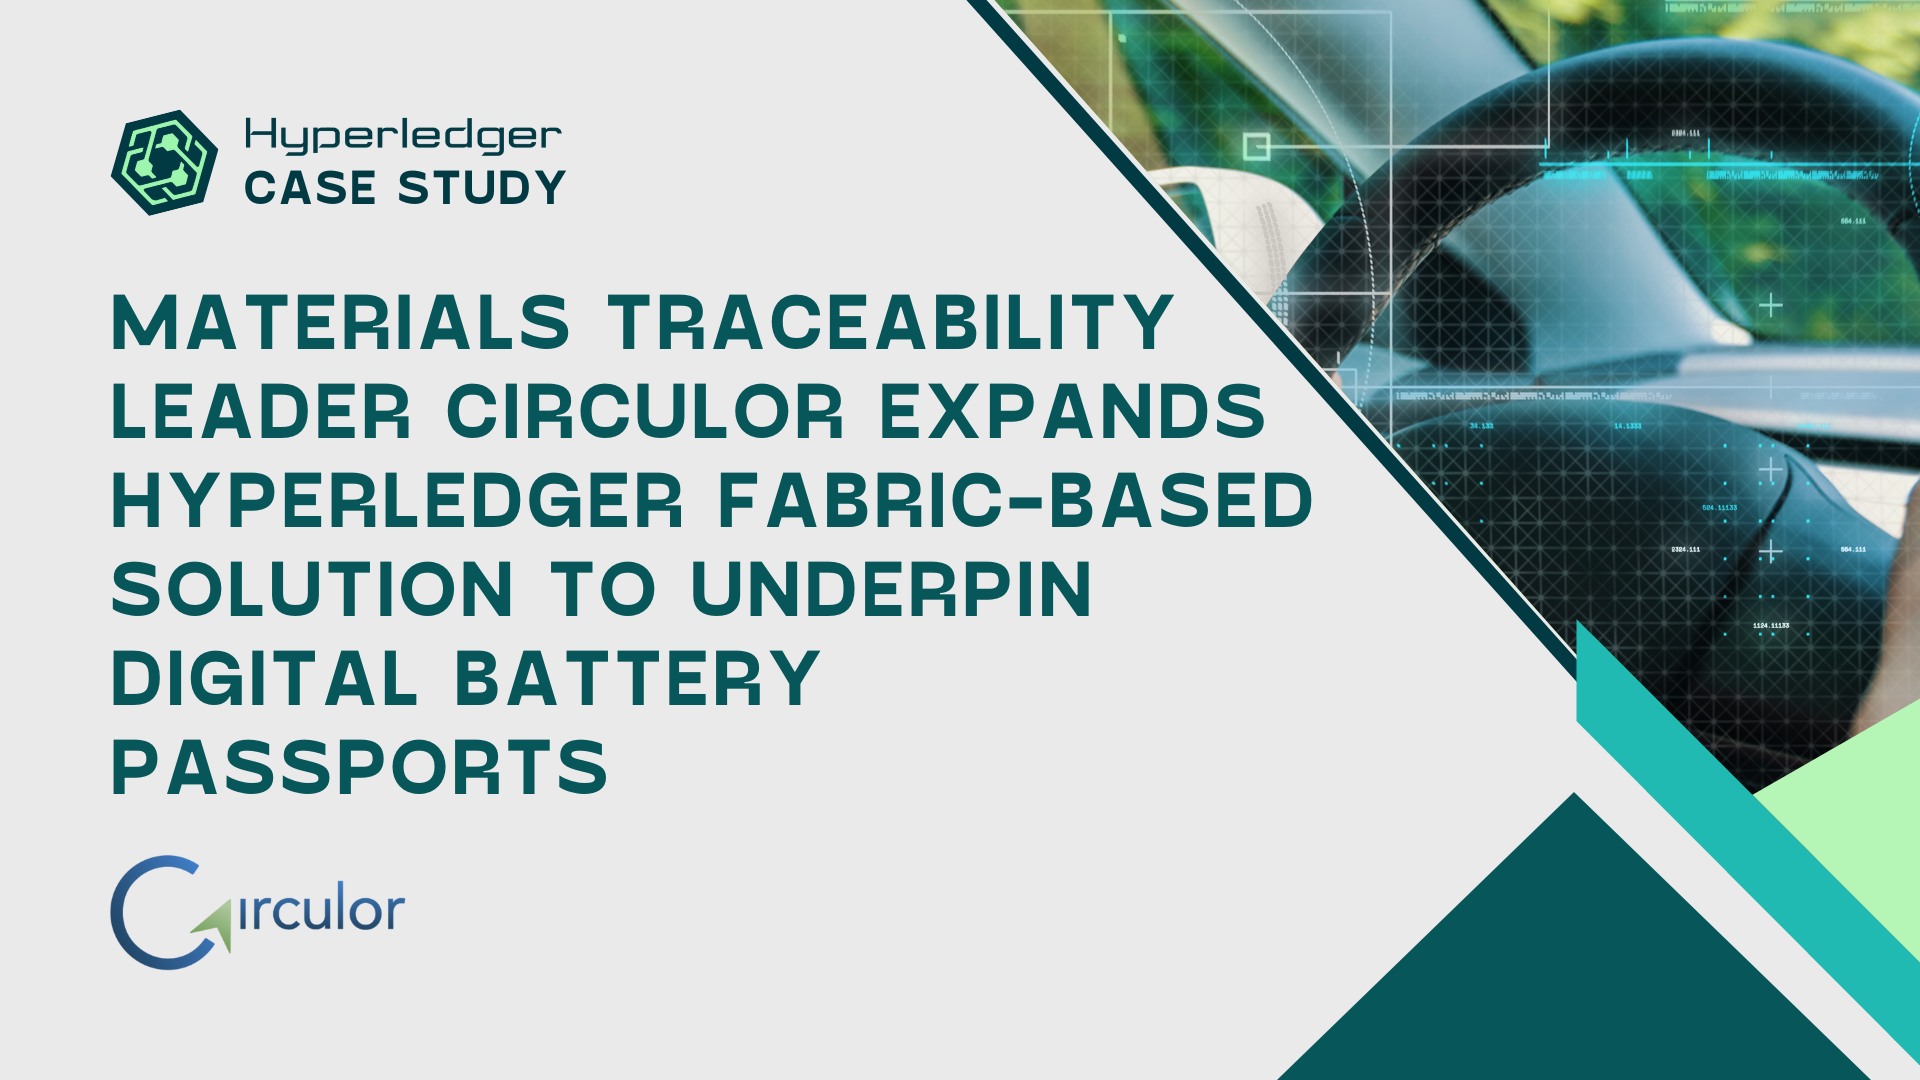 Materials Traceability Leader Circulor Expands Hyperledger Fabric-Based Solution to Underpin Digital Battery Passports